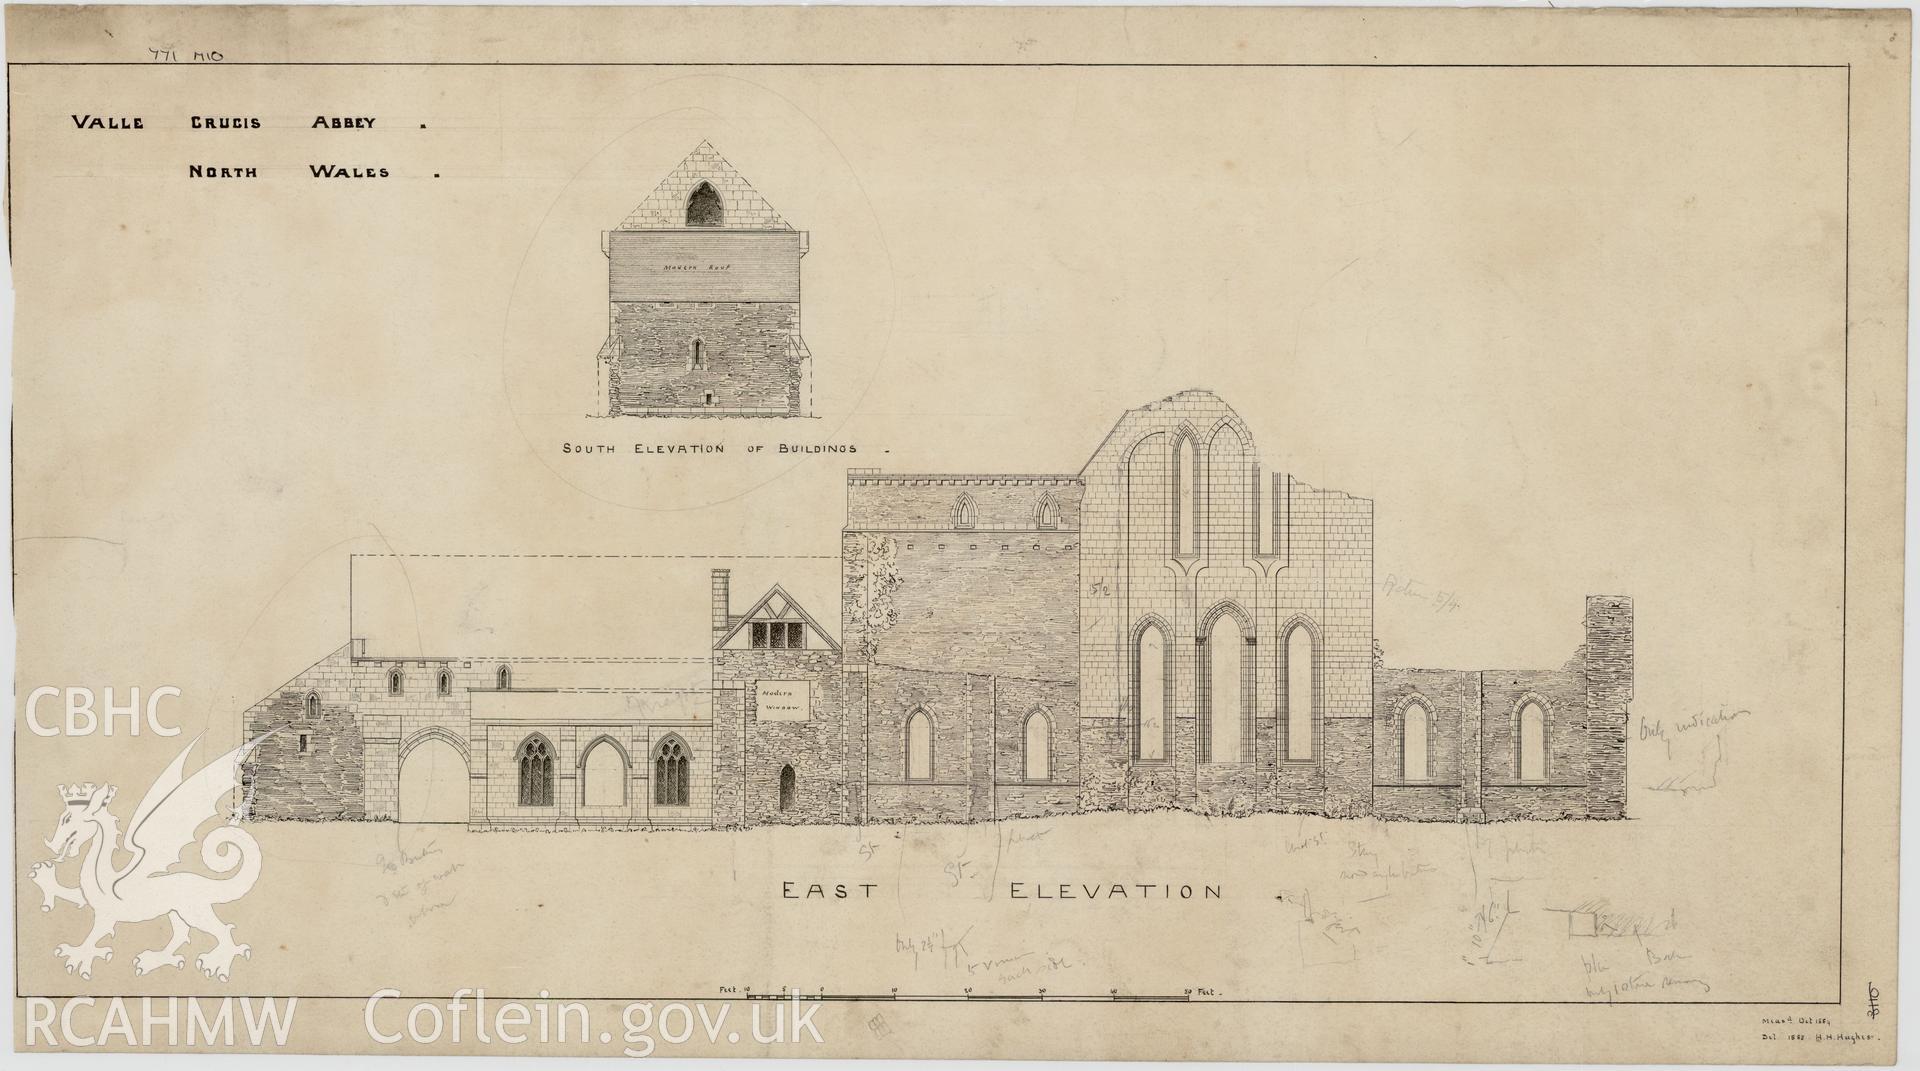 Non RCAHMW drawing by Harold Hughes showing east elevation of Valle Crucis Abbey.